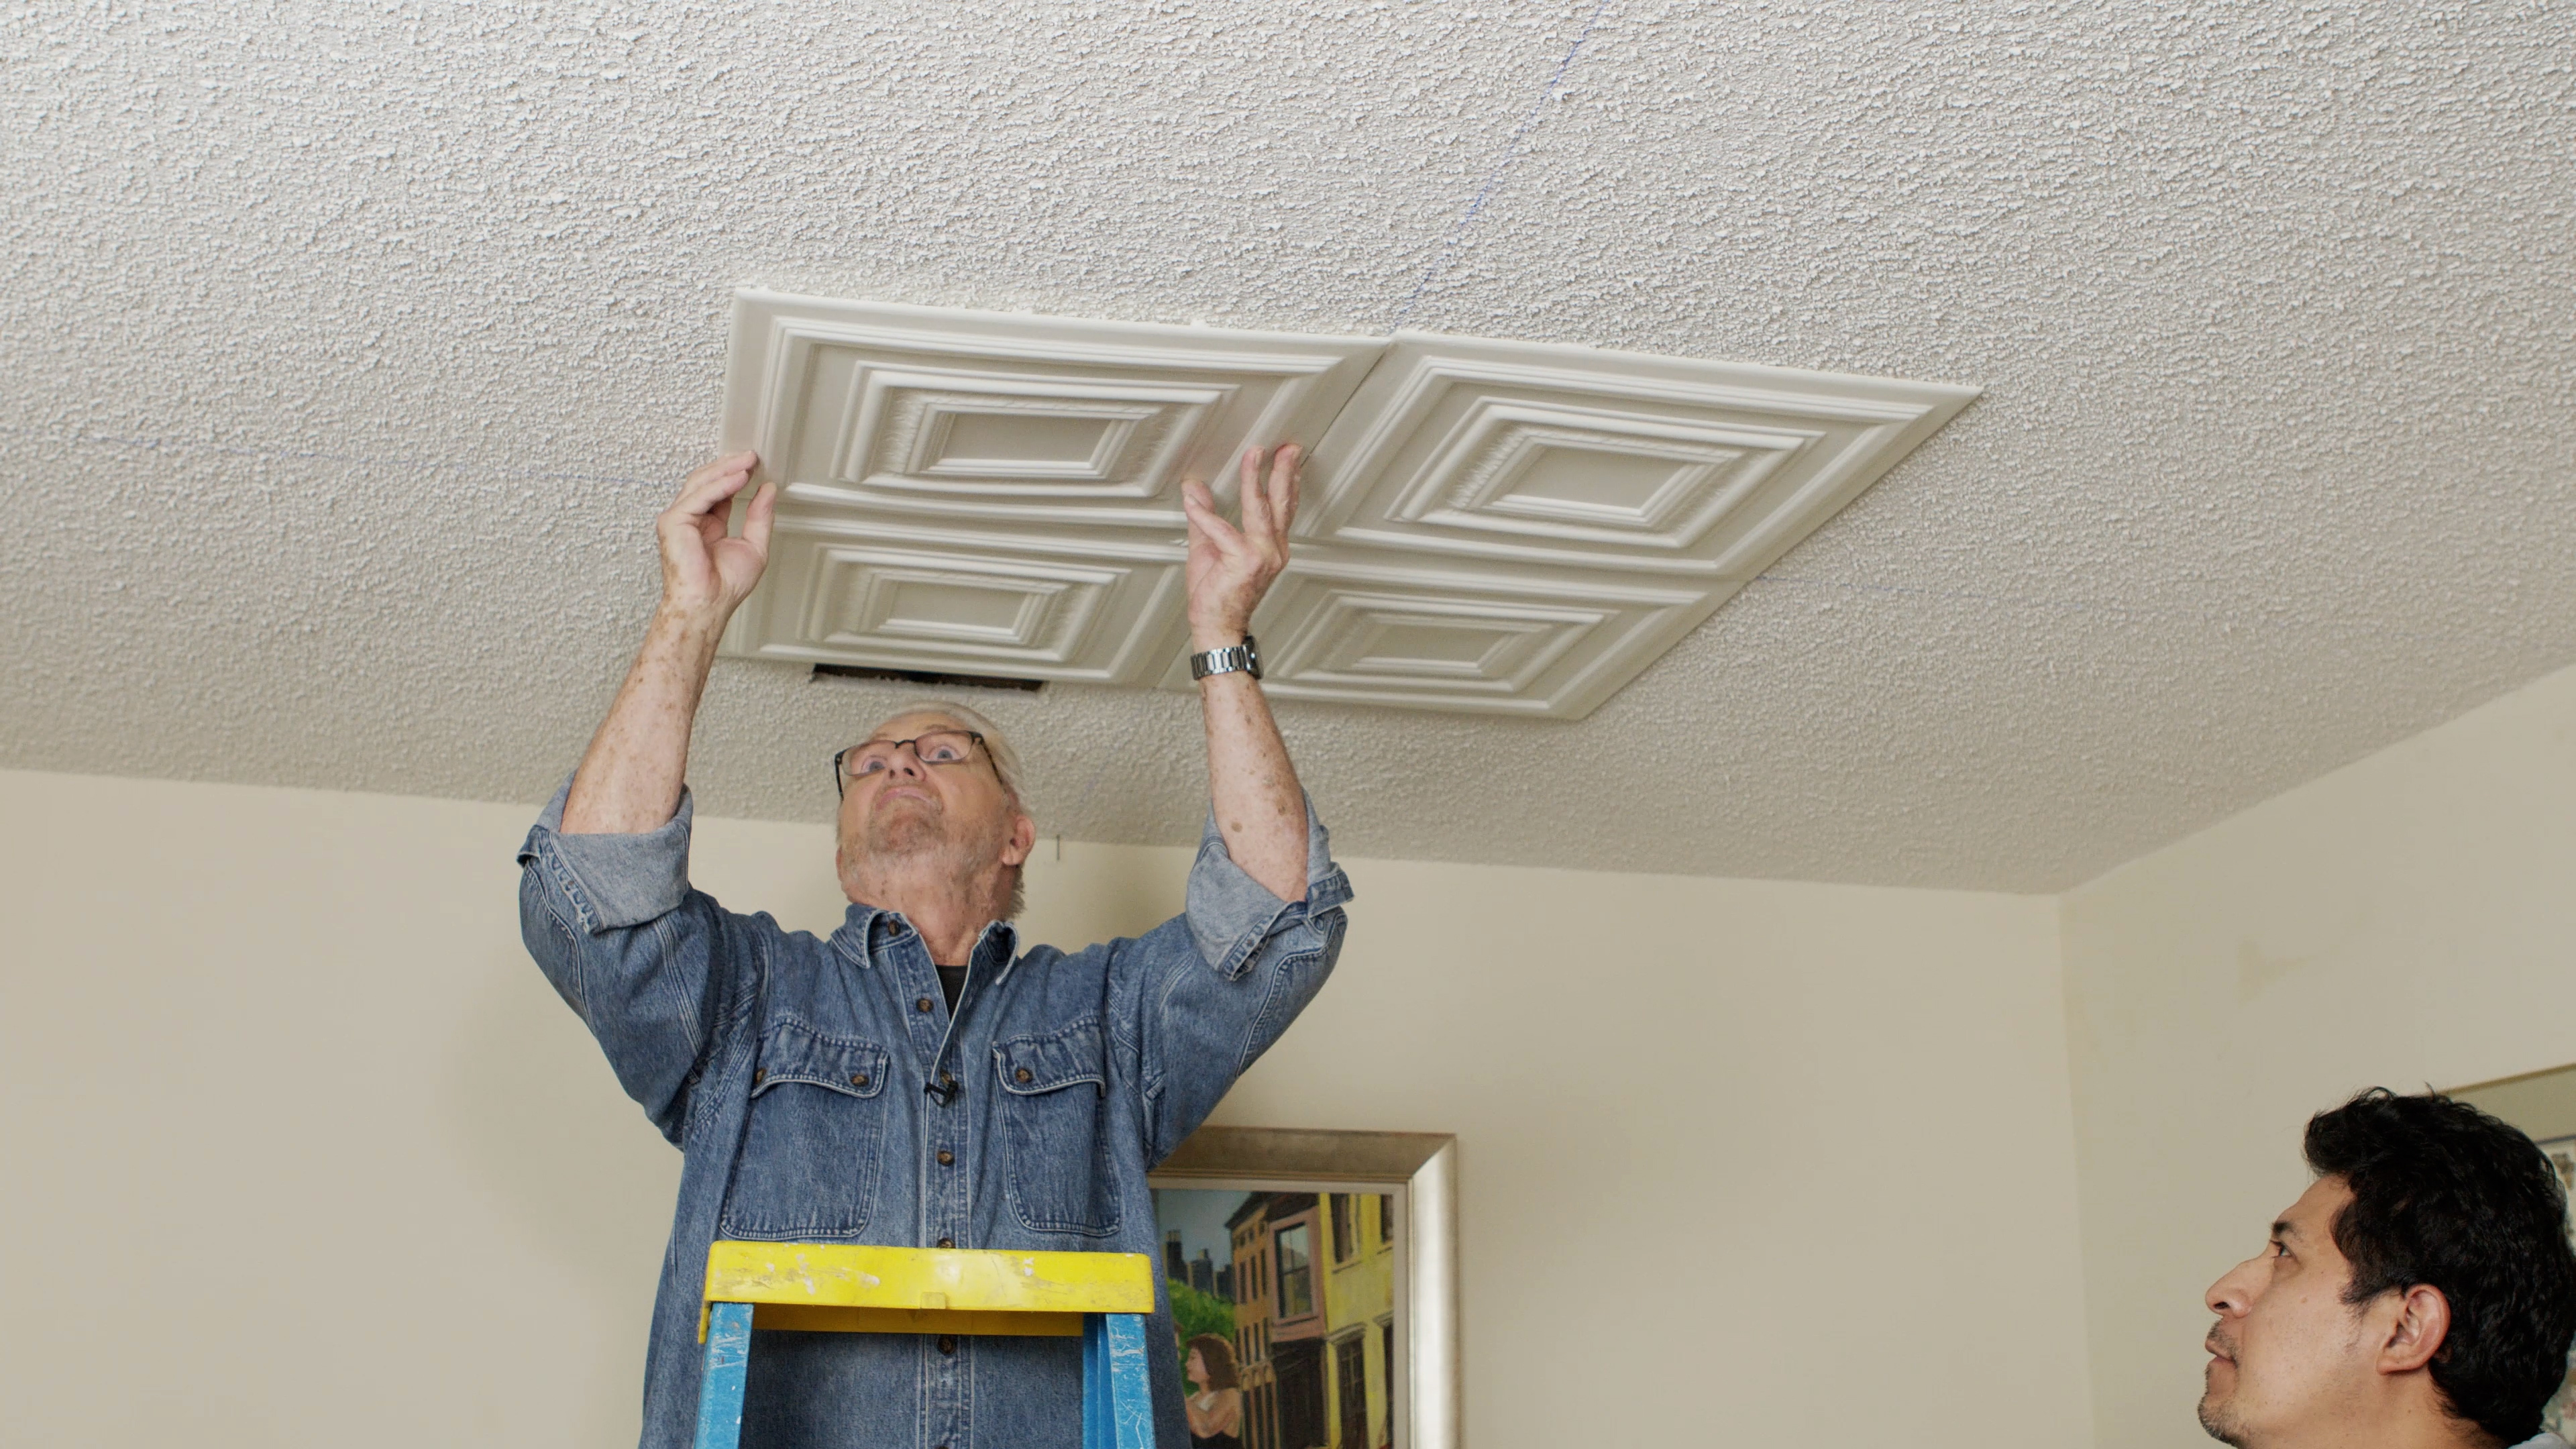 Popcorn Ceilings Ron Hazelton, How To Install Ceiling Tiles On Popcorn